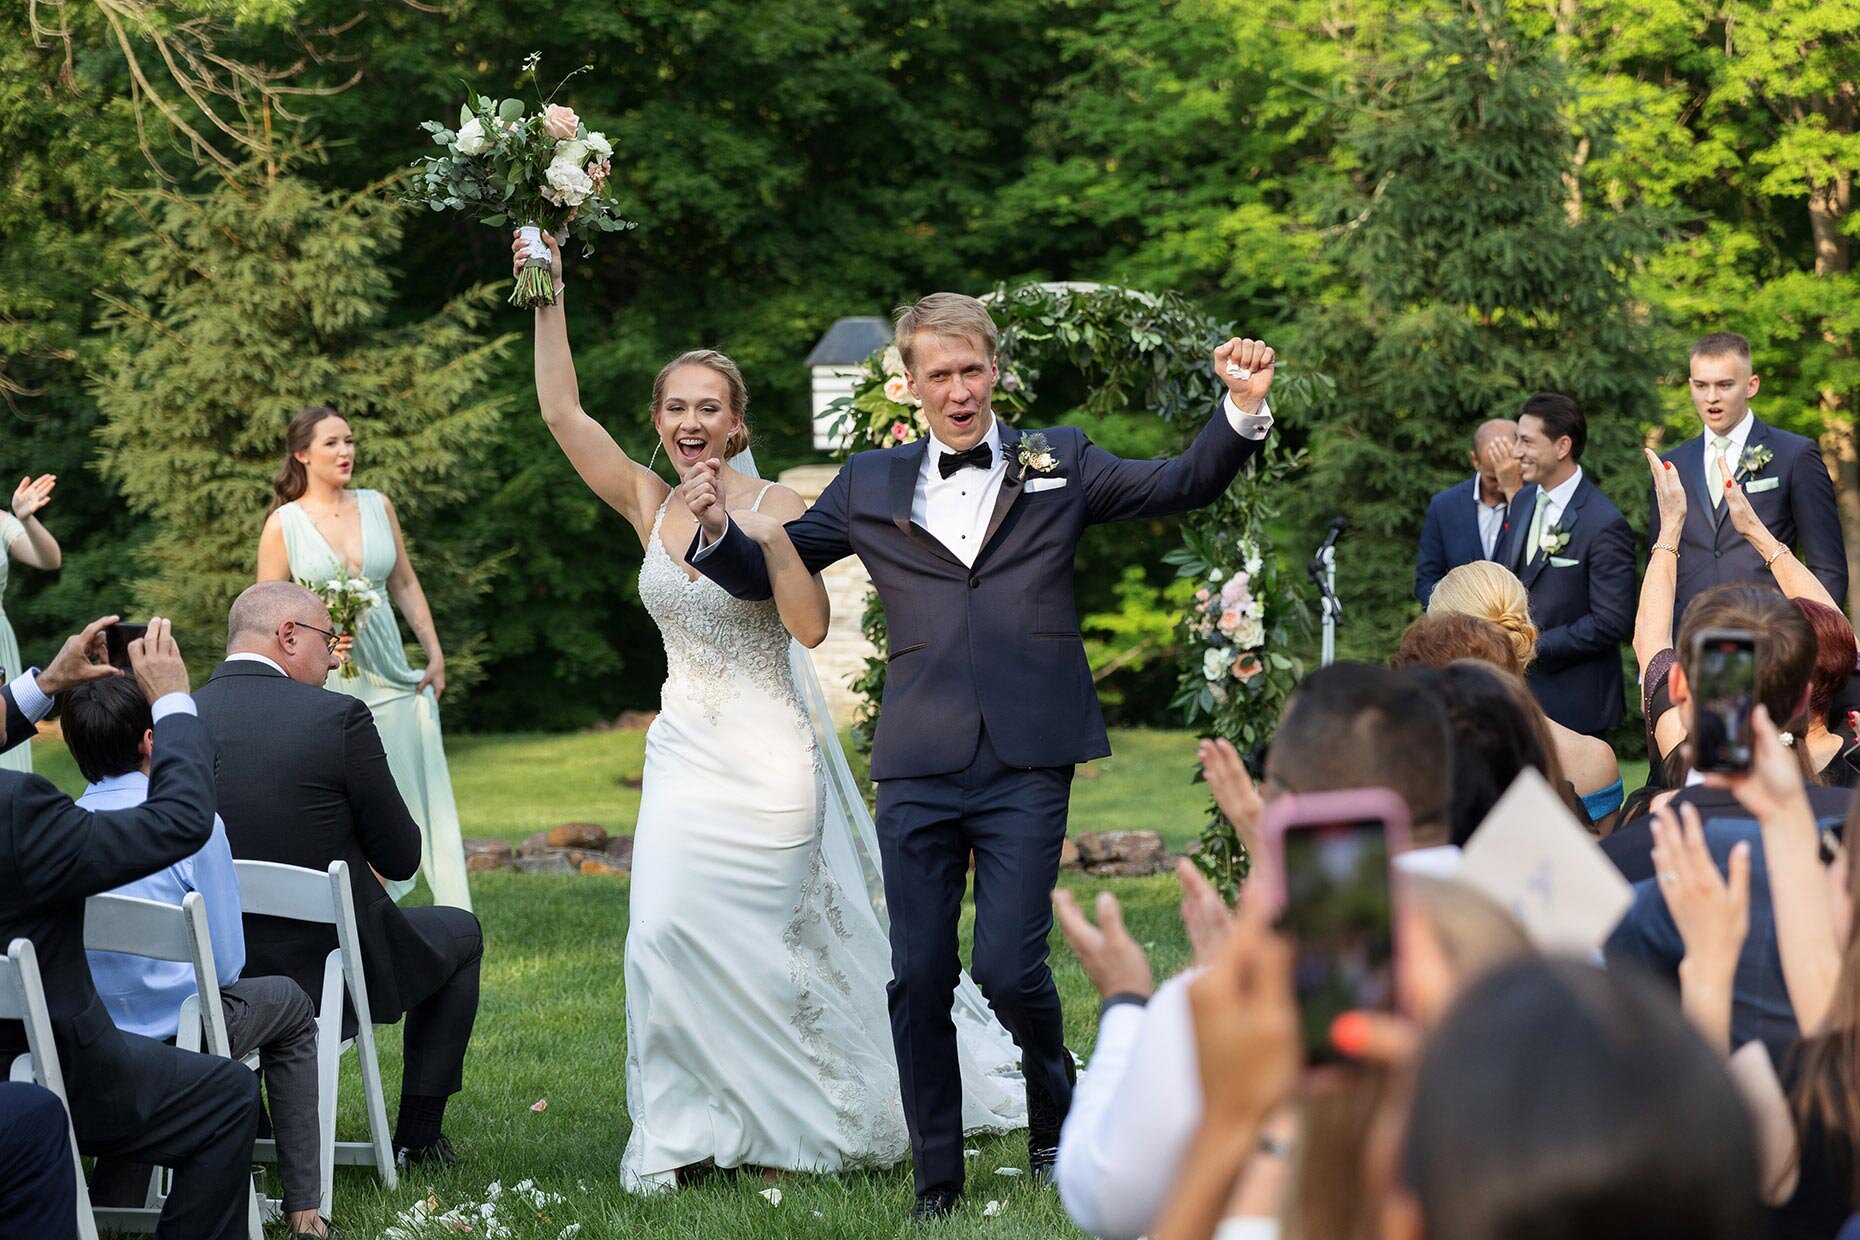 Bride and groom walk down the aisle during recessional